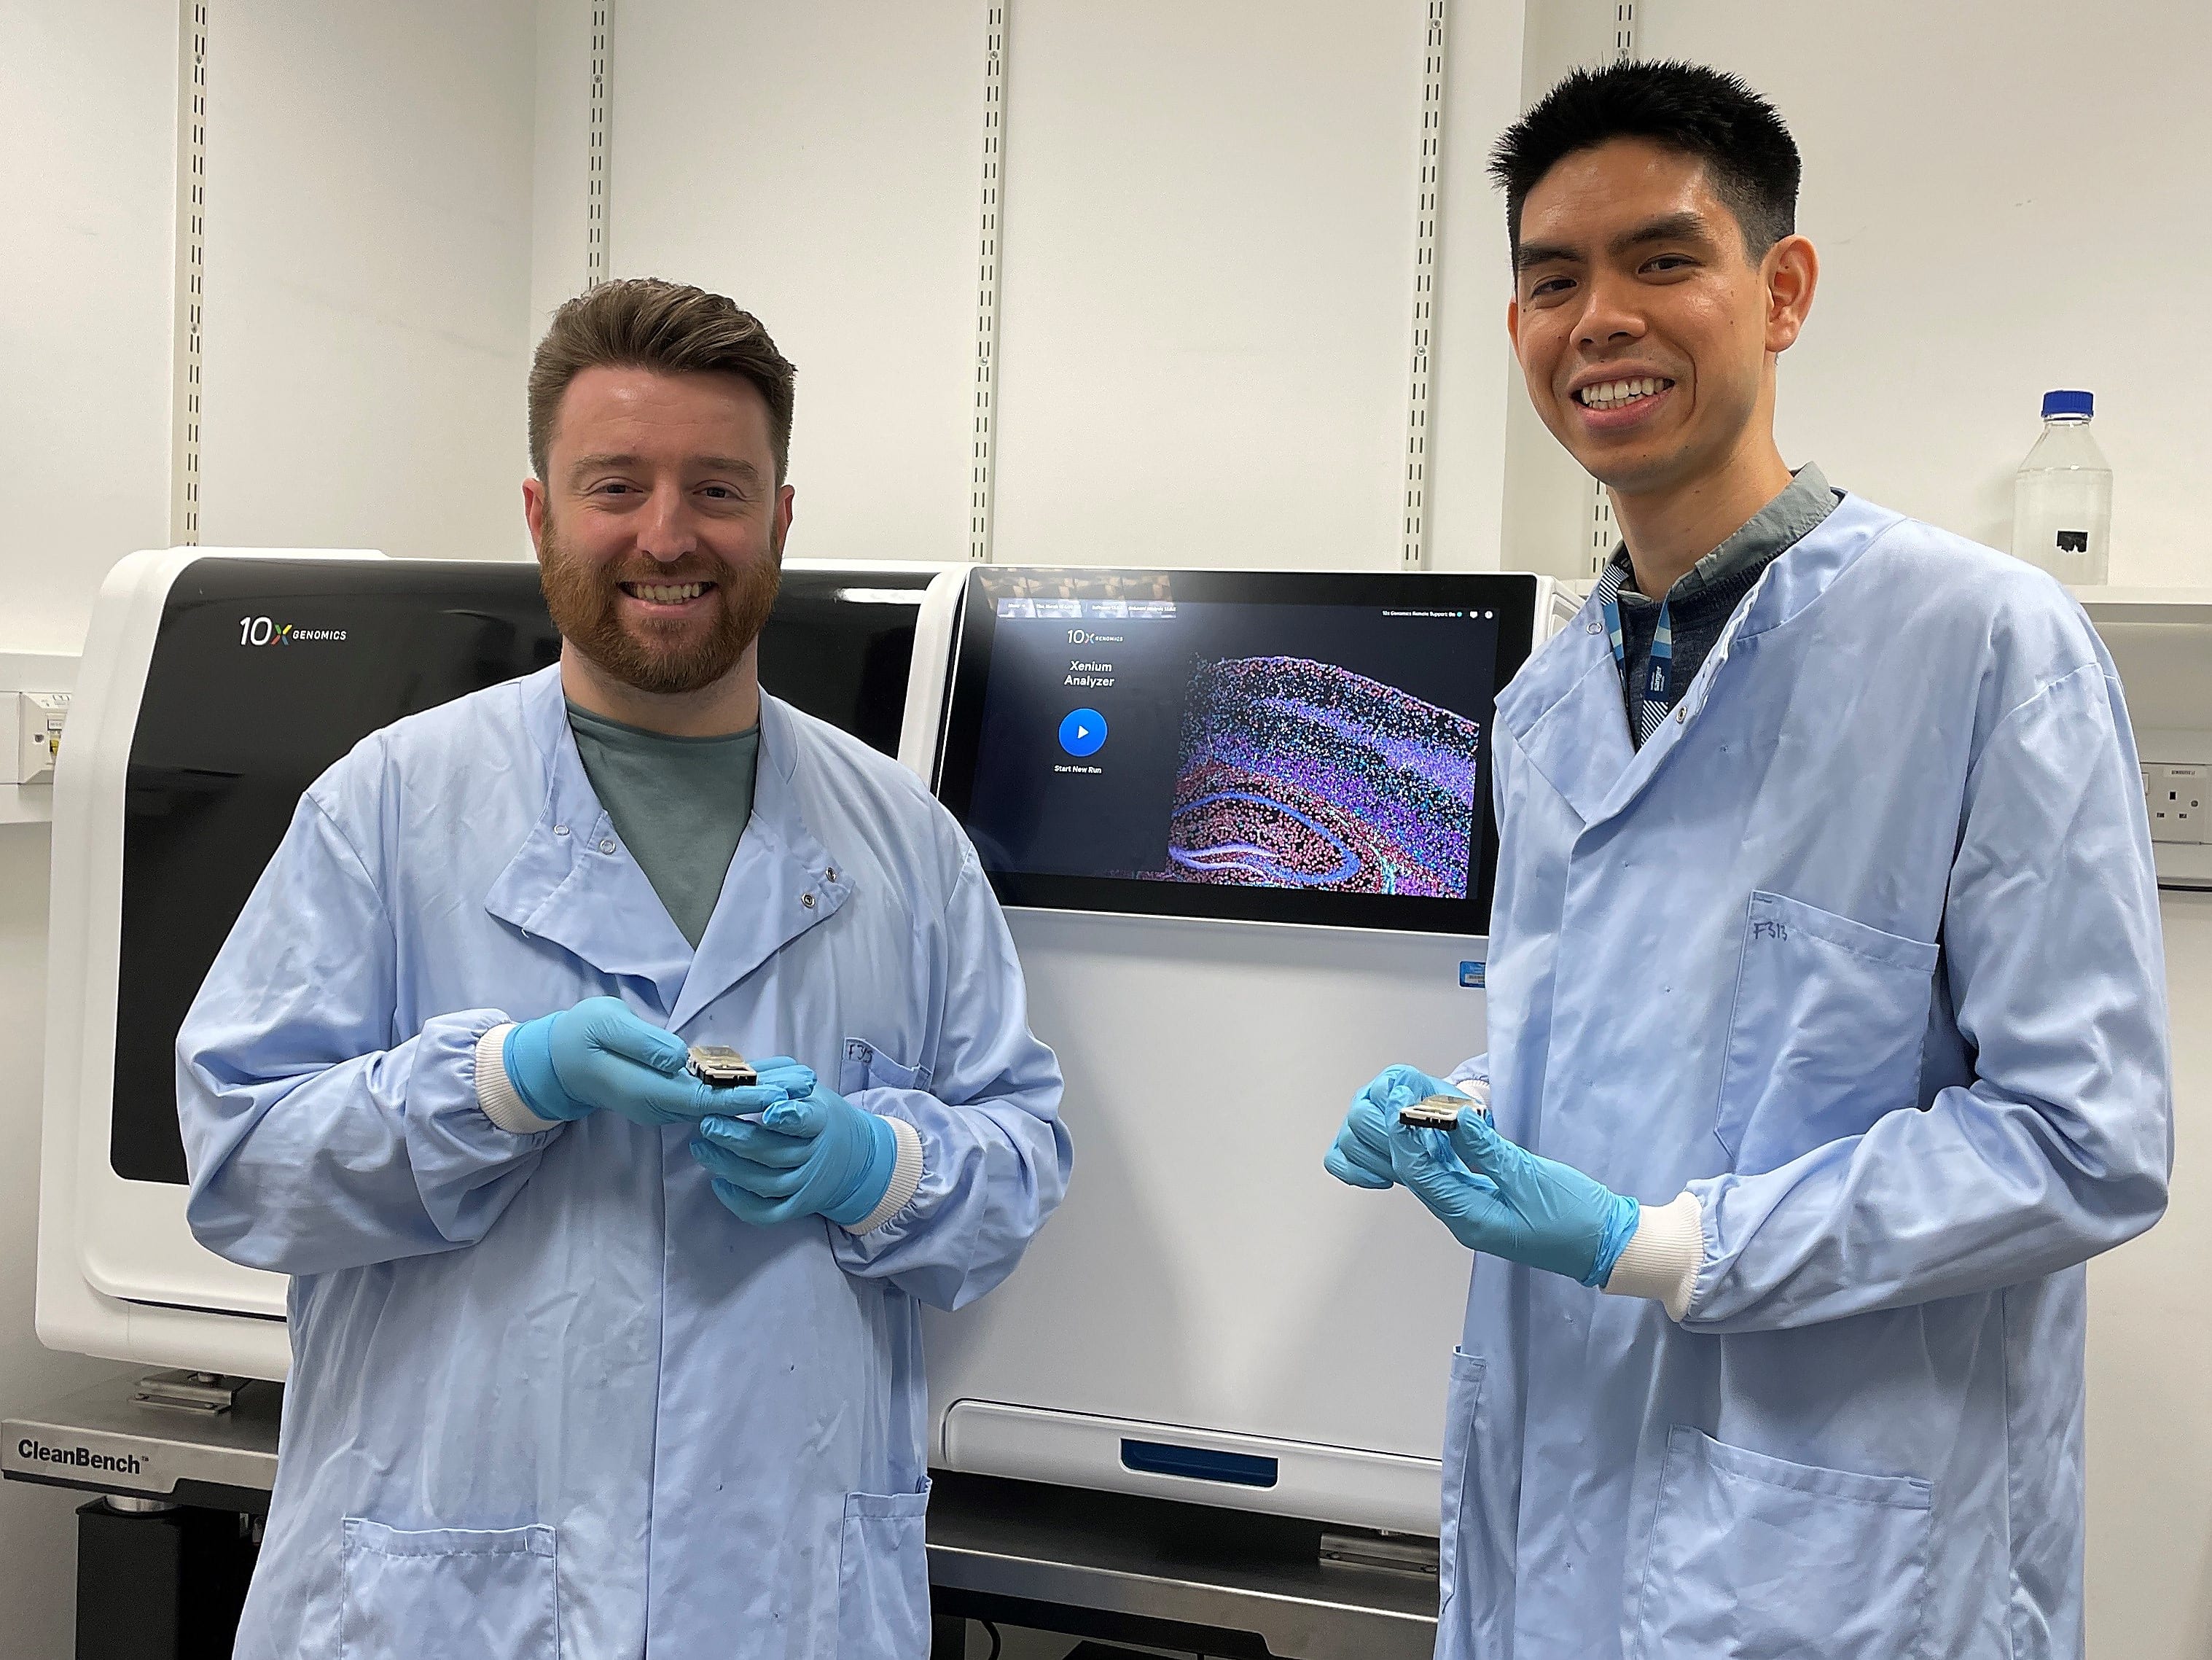 Dr. Roberts has been working with central pipeline teams at the Wellcome Sanger Institute to establish Xenium, in particular Dr. Andrew Trinh from the Cellular Operations department. They are shown together here loading their first Xenium experiment. Image Credit: Monika Dabrowska.